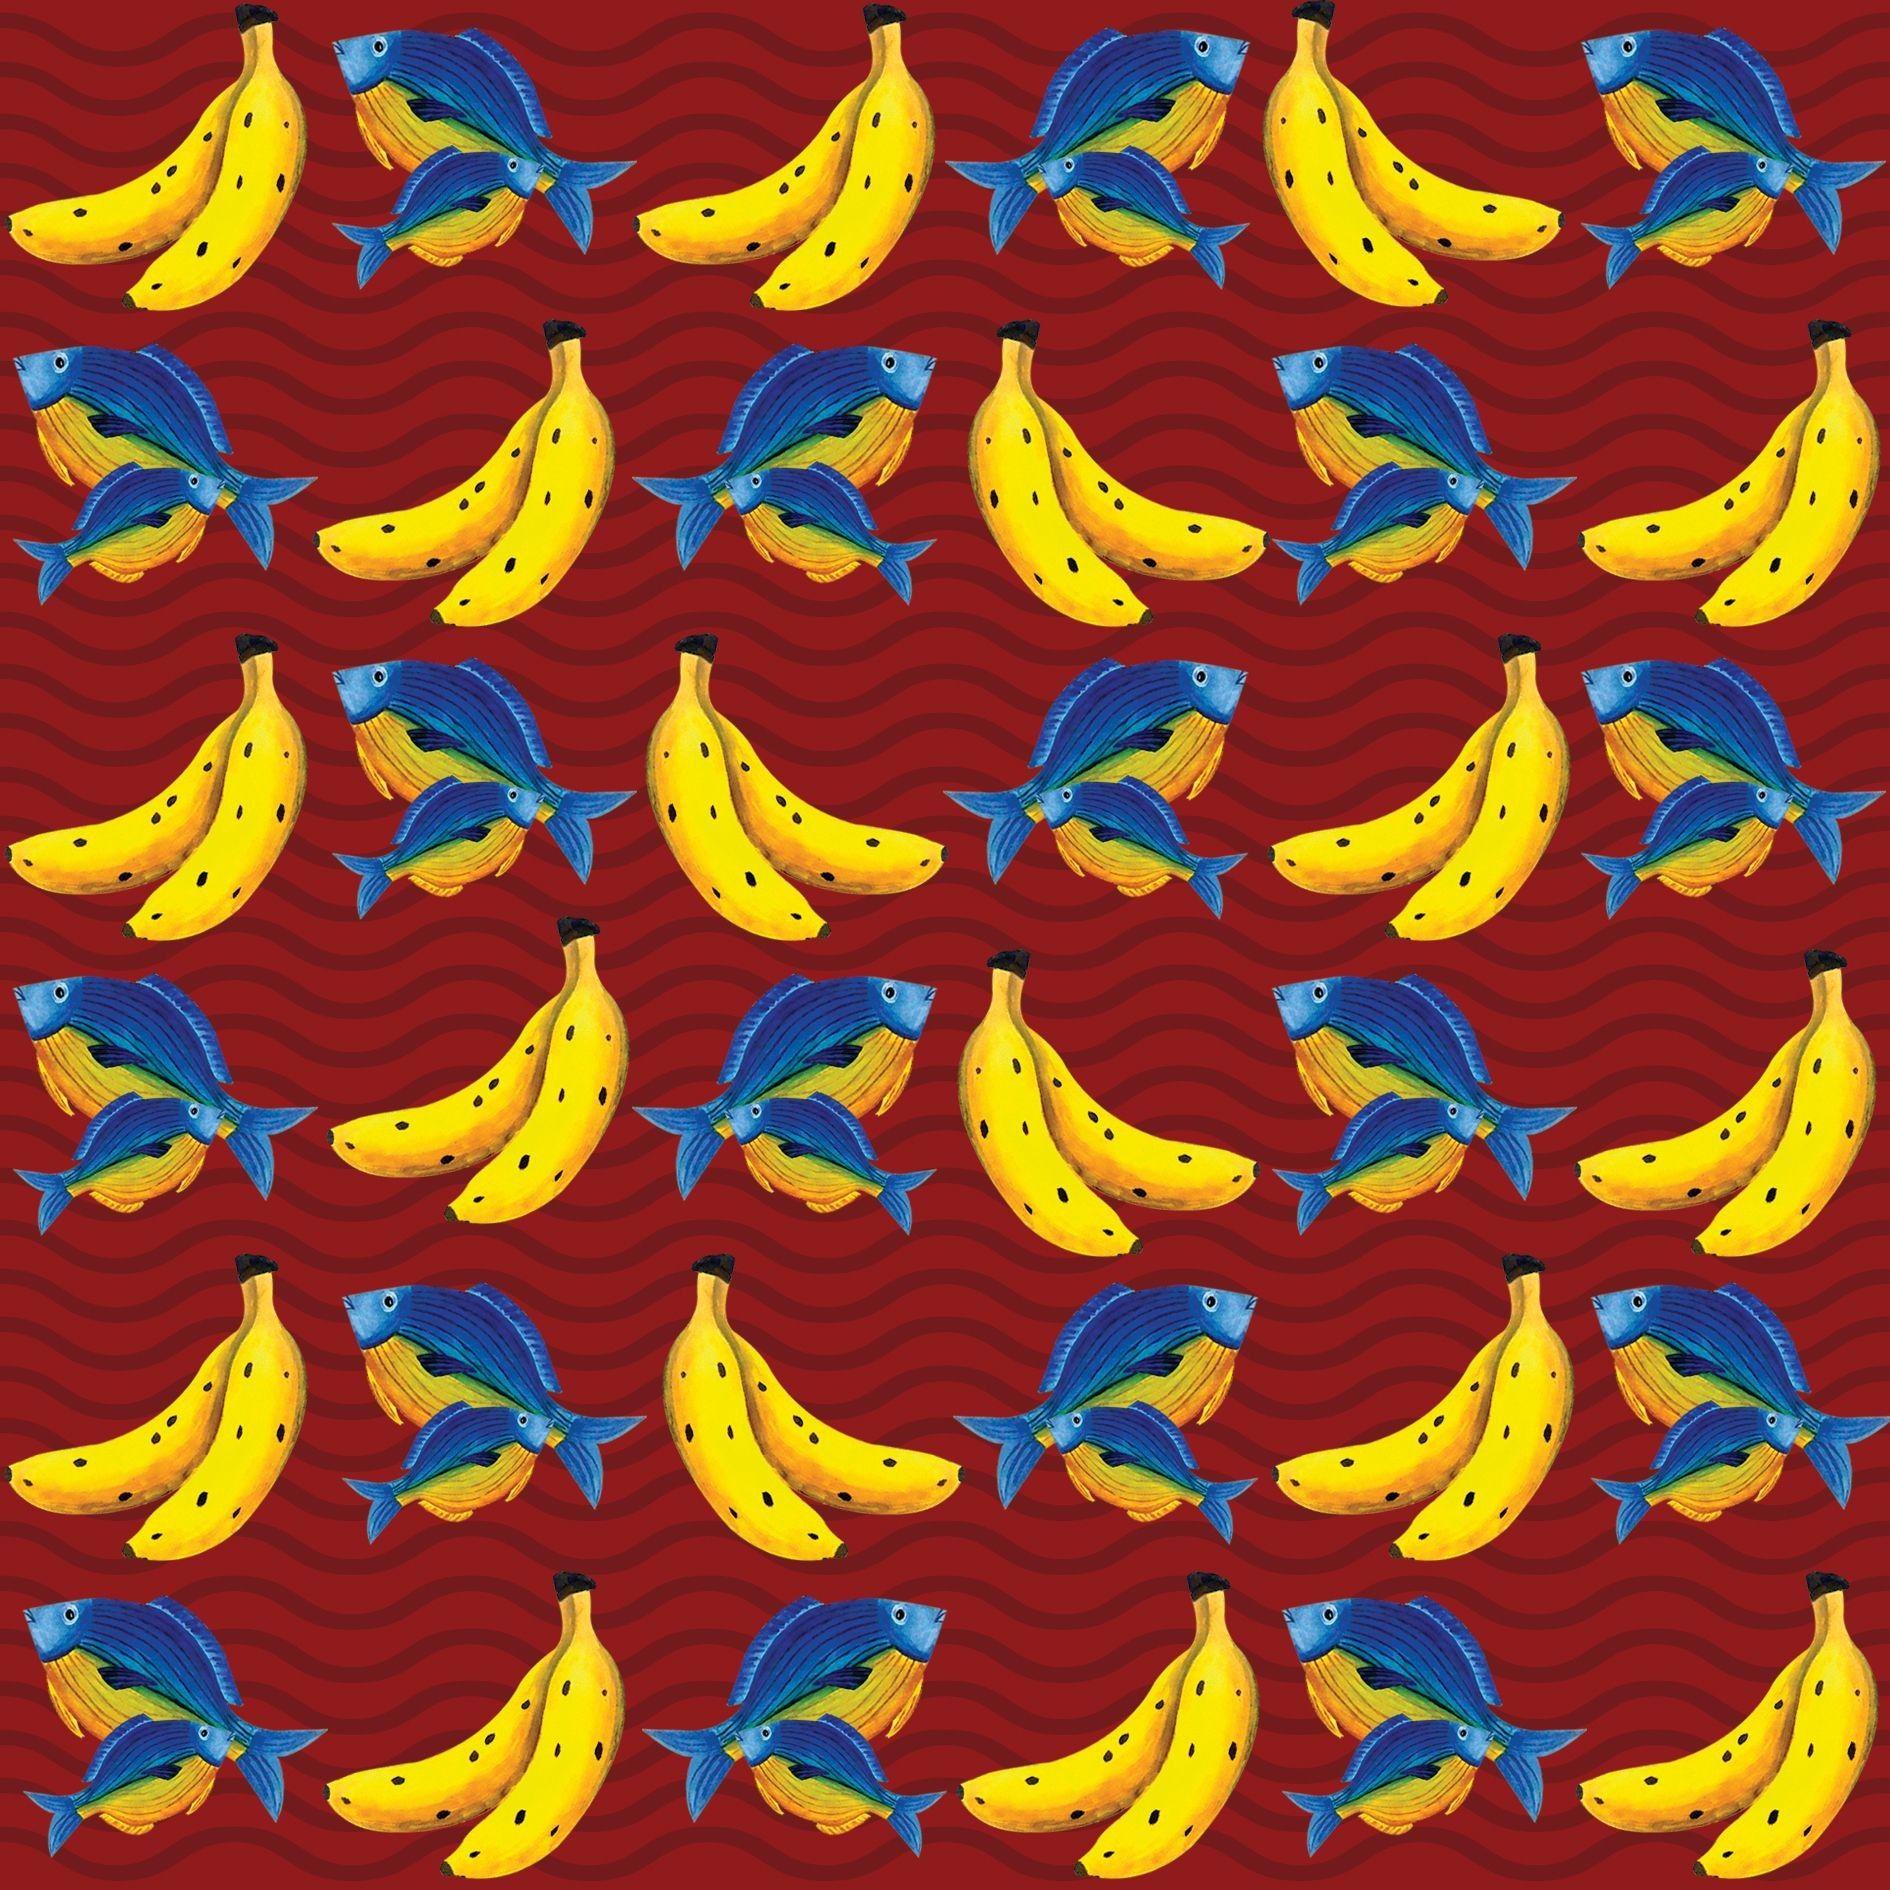 Wallpaper for iPhone Banana Lovely Fishes with Bananas Rapport